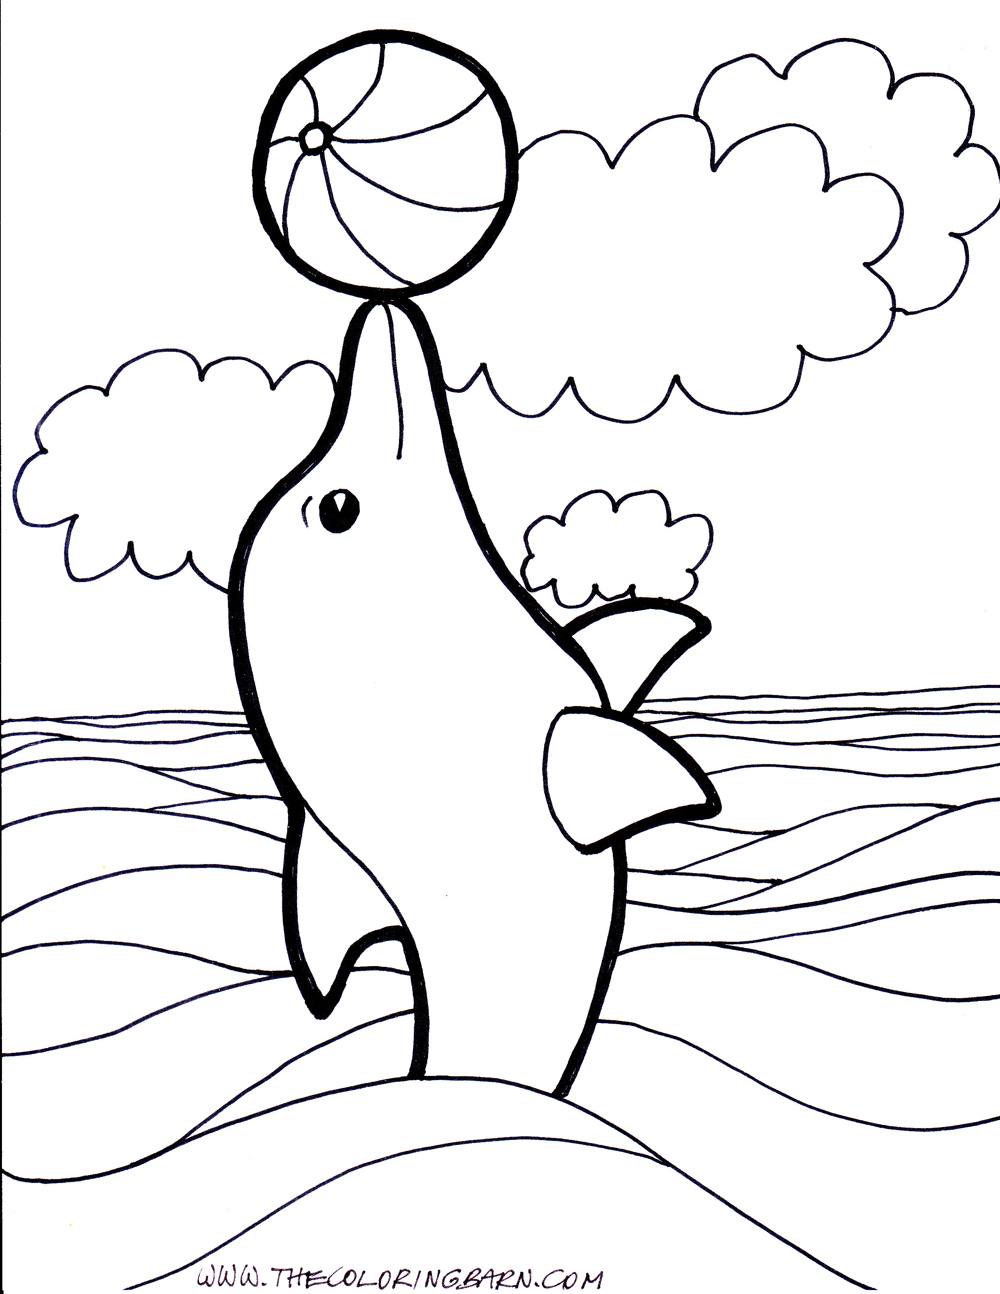 Coloring Pages Dolphins 177 | Free Printable Coloring Pages - Clip - Dolphin Coloring Sheets Free Printable